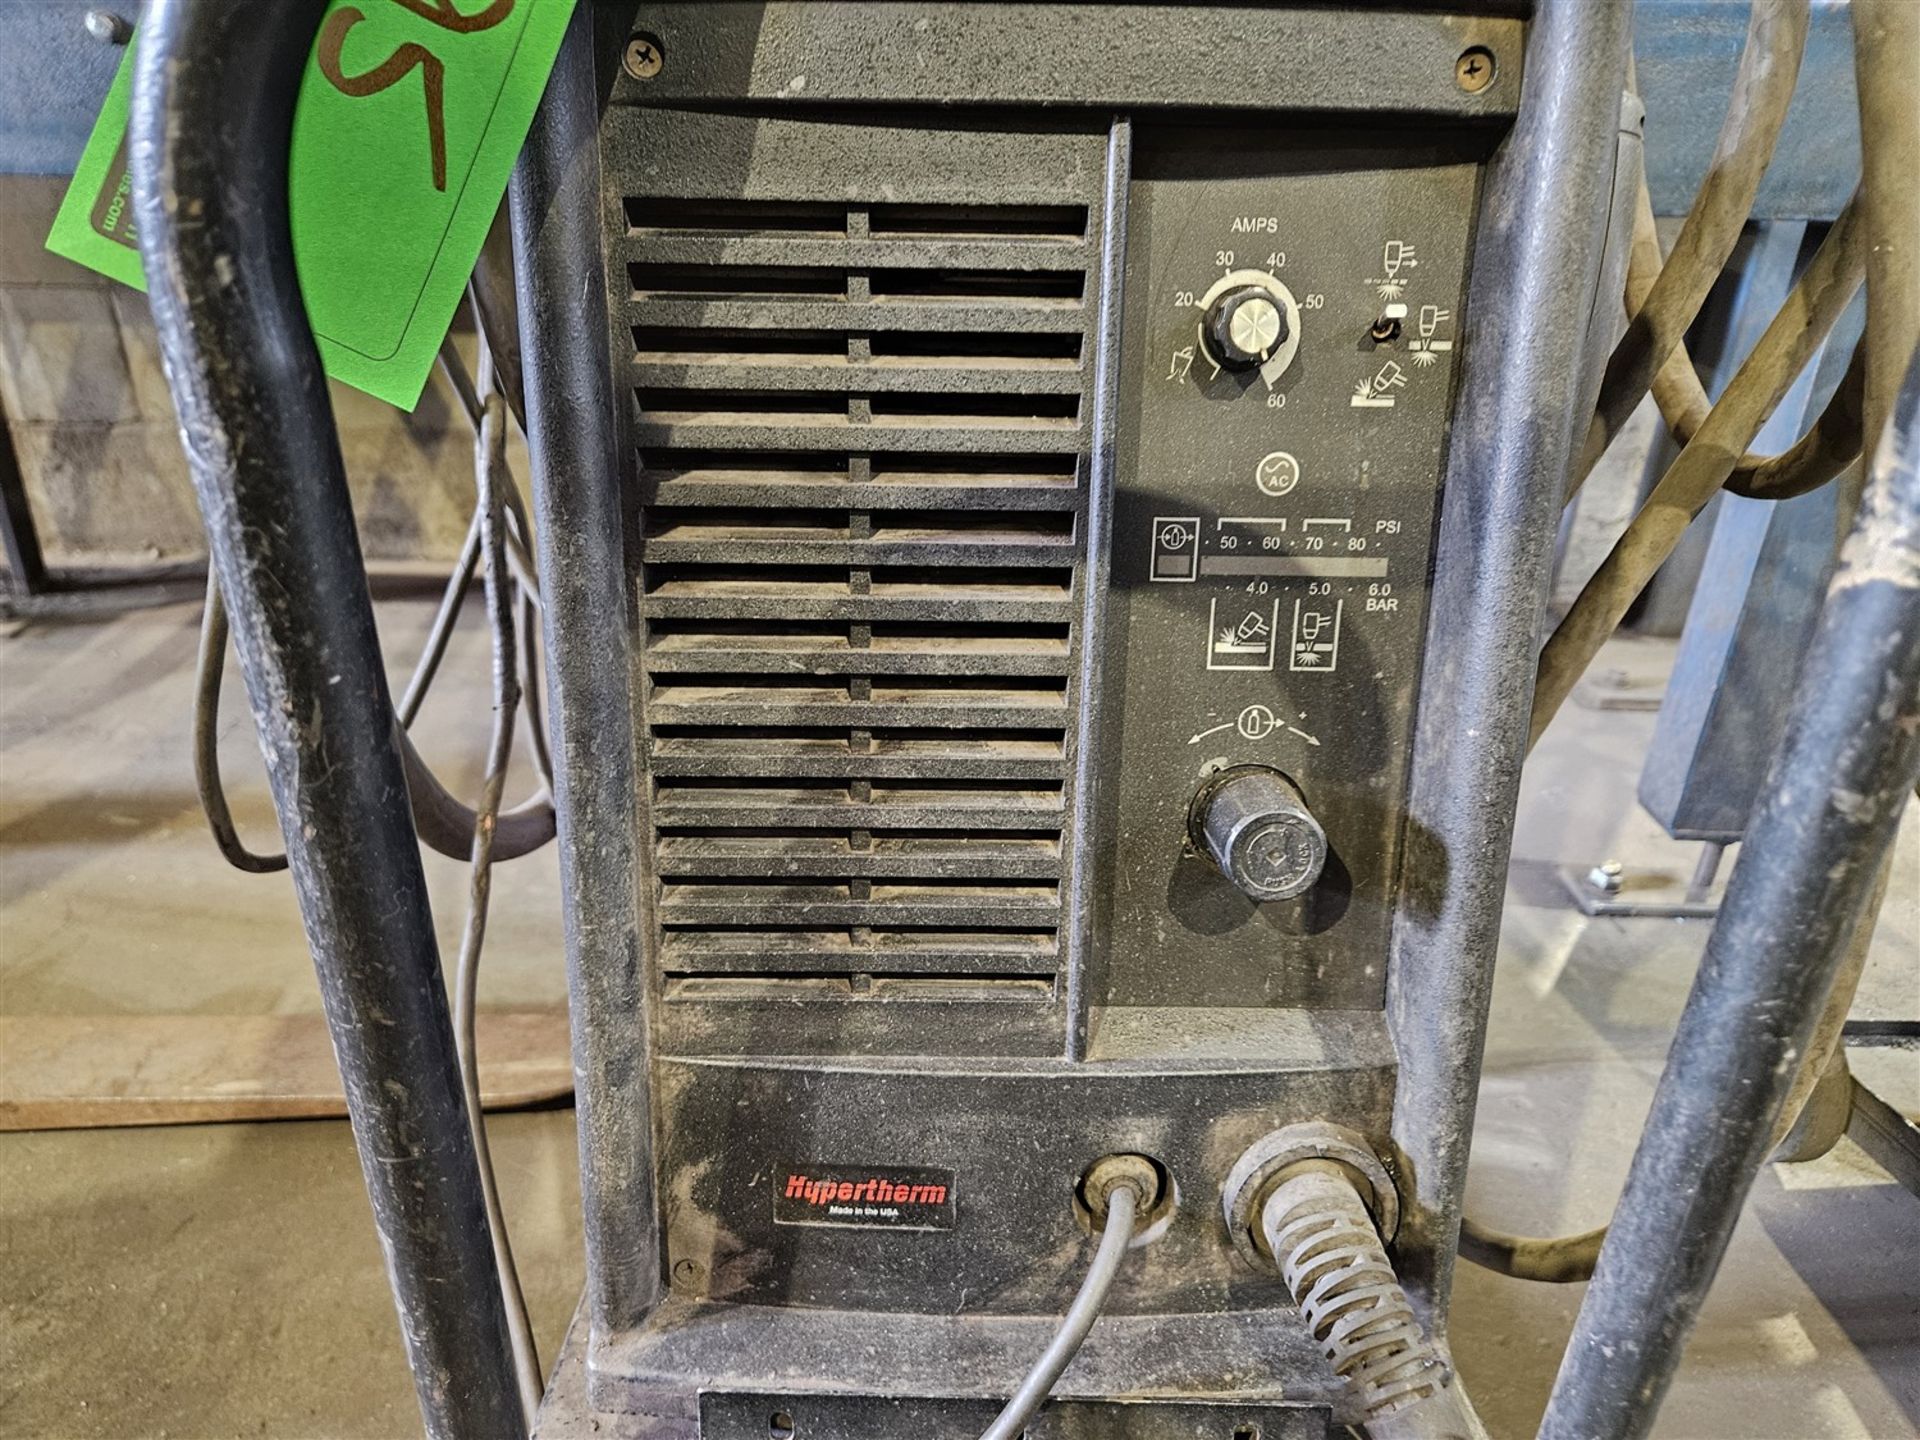 HYPERTHERM POWER MAX 1000 G3 SERIES PLASMA CUTTER - Image 2 of 2